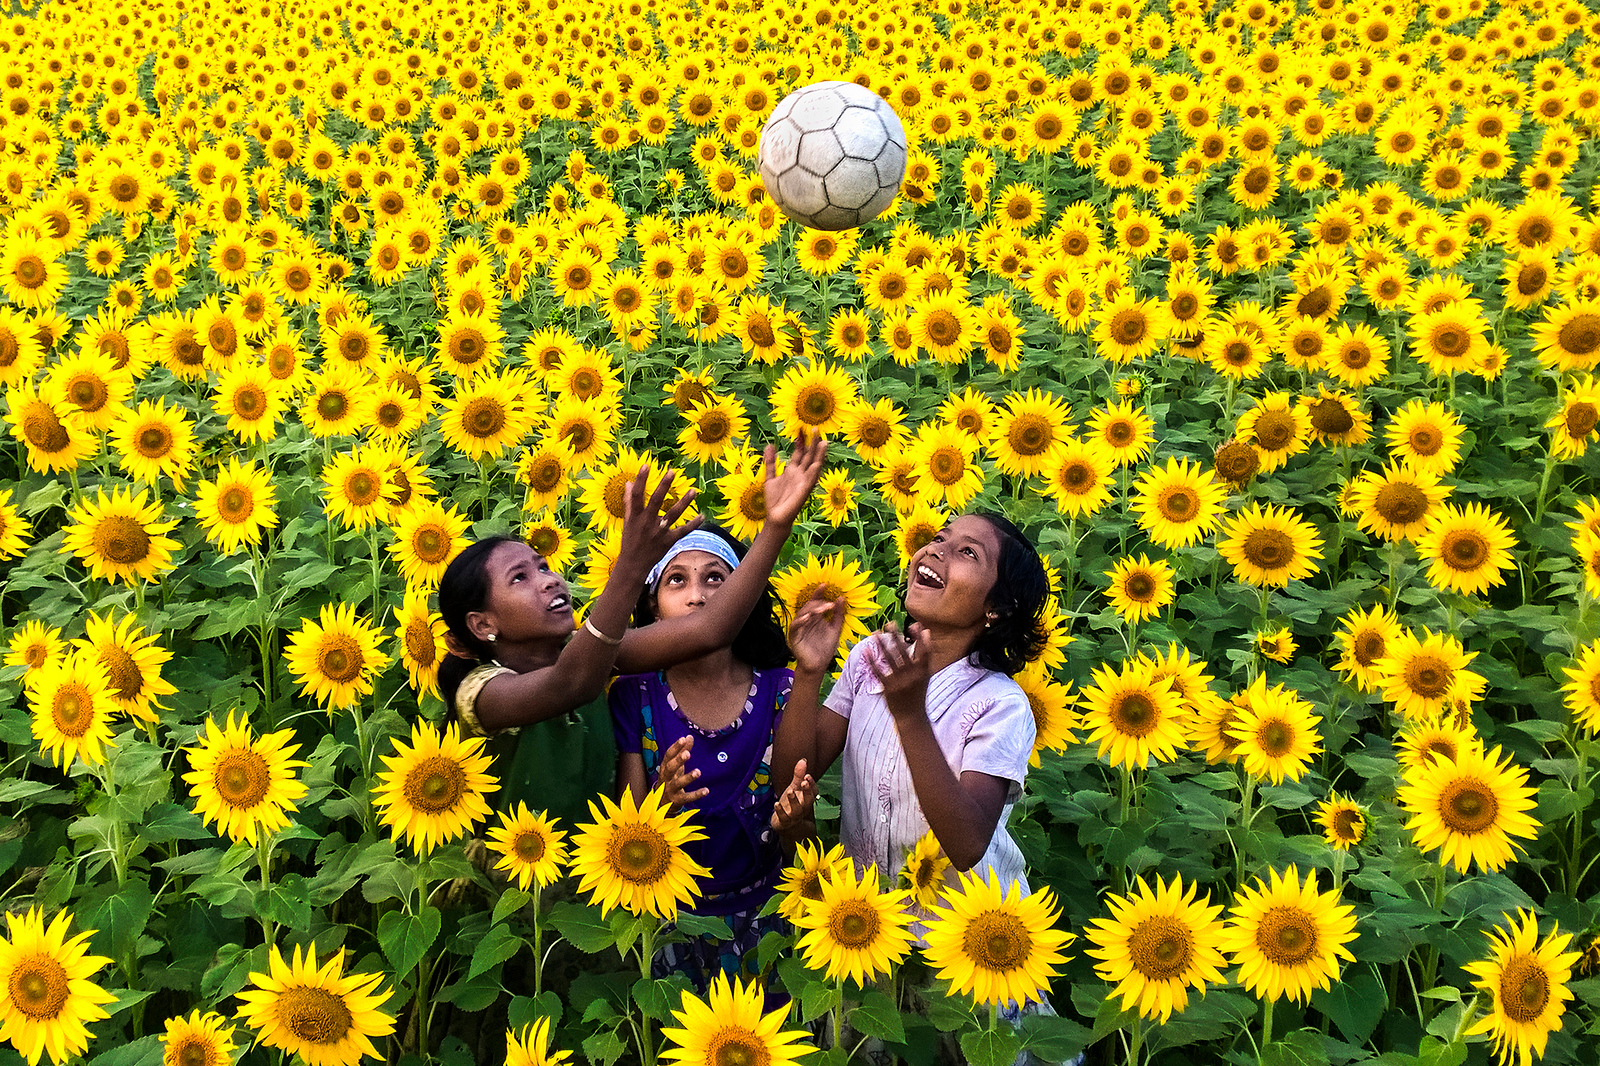 Girls play in a field of sunflowers